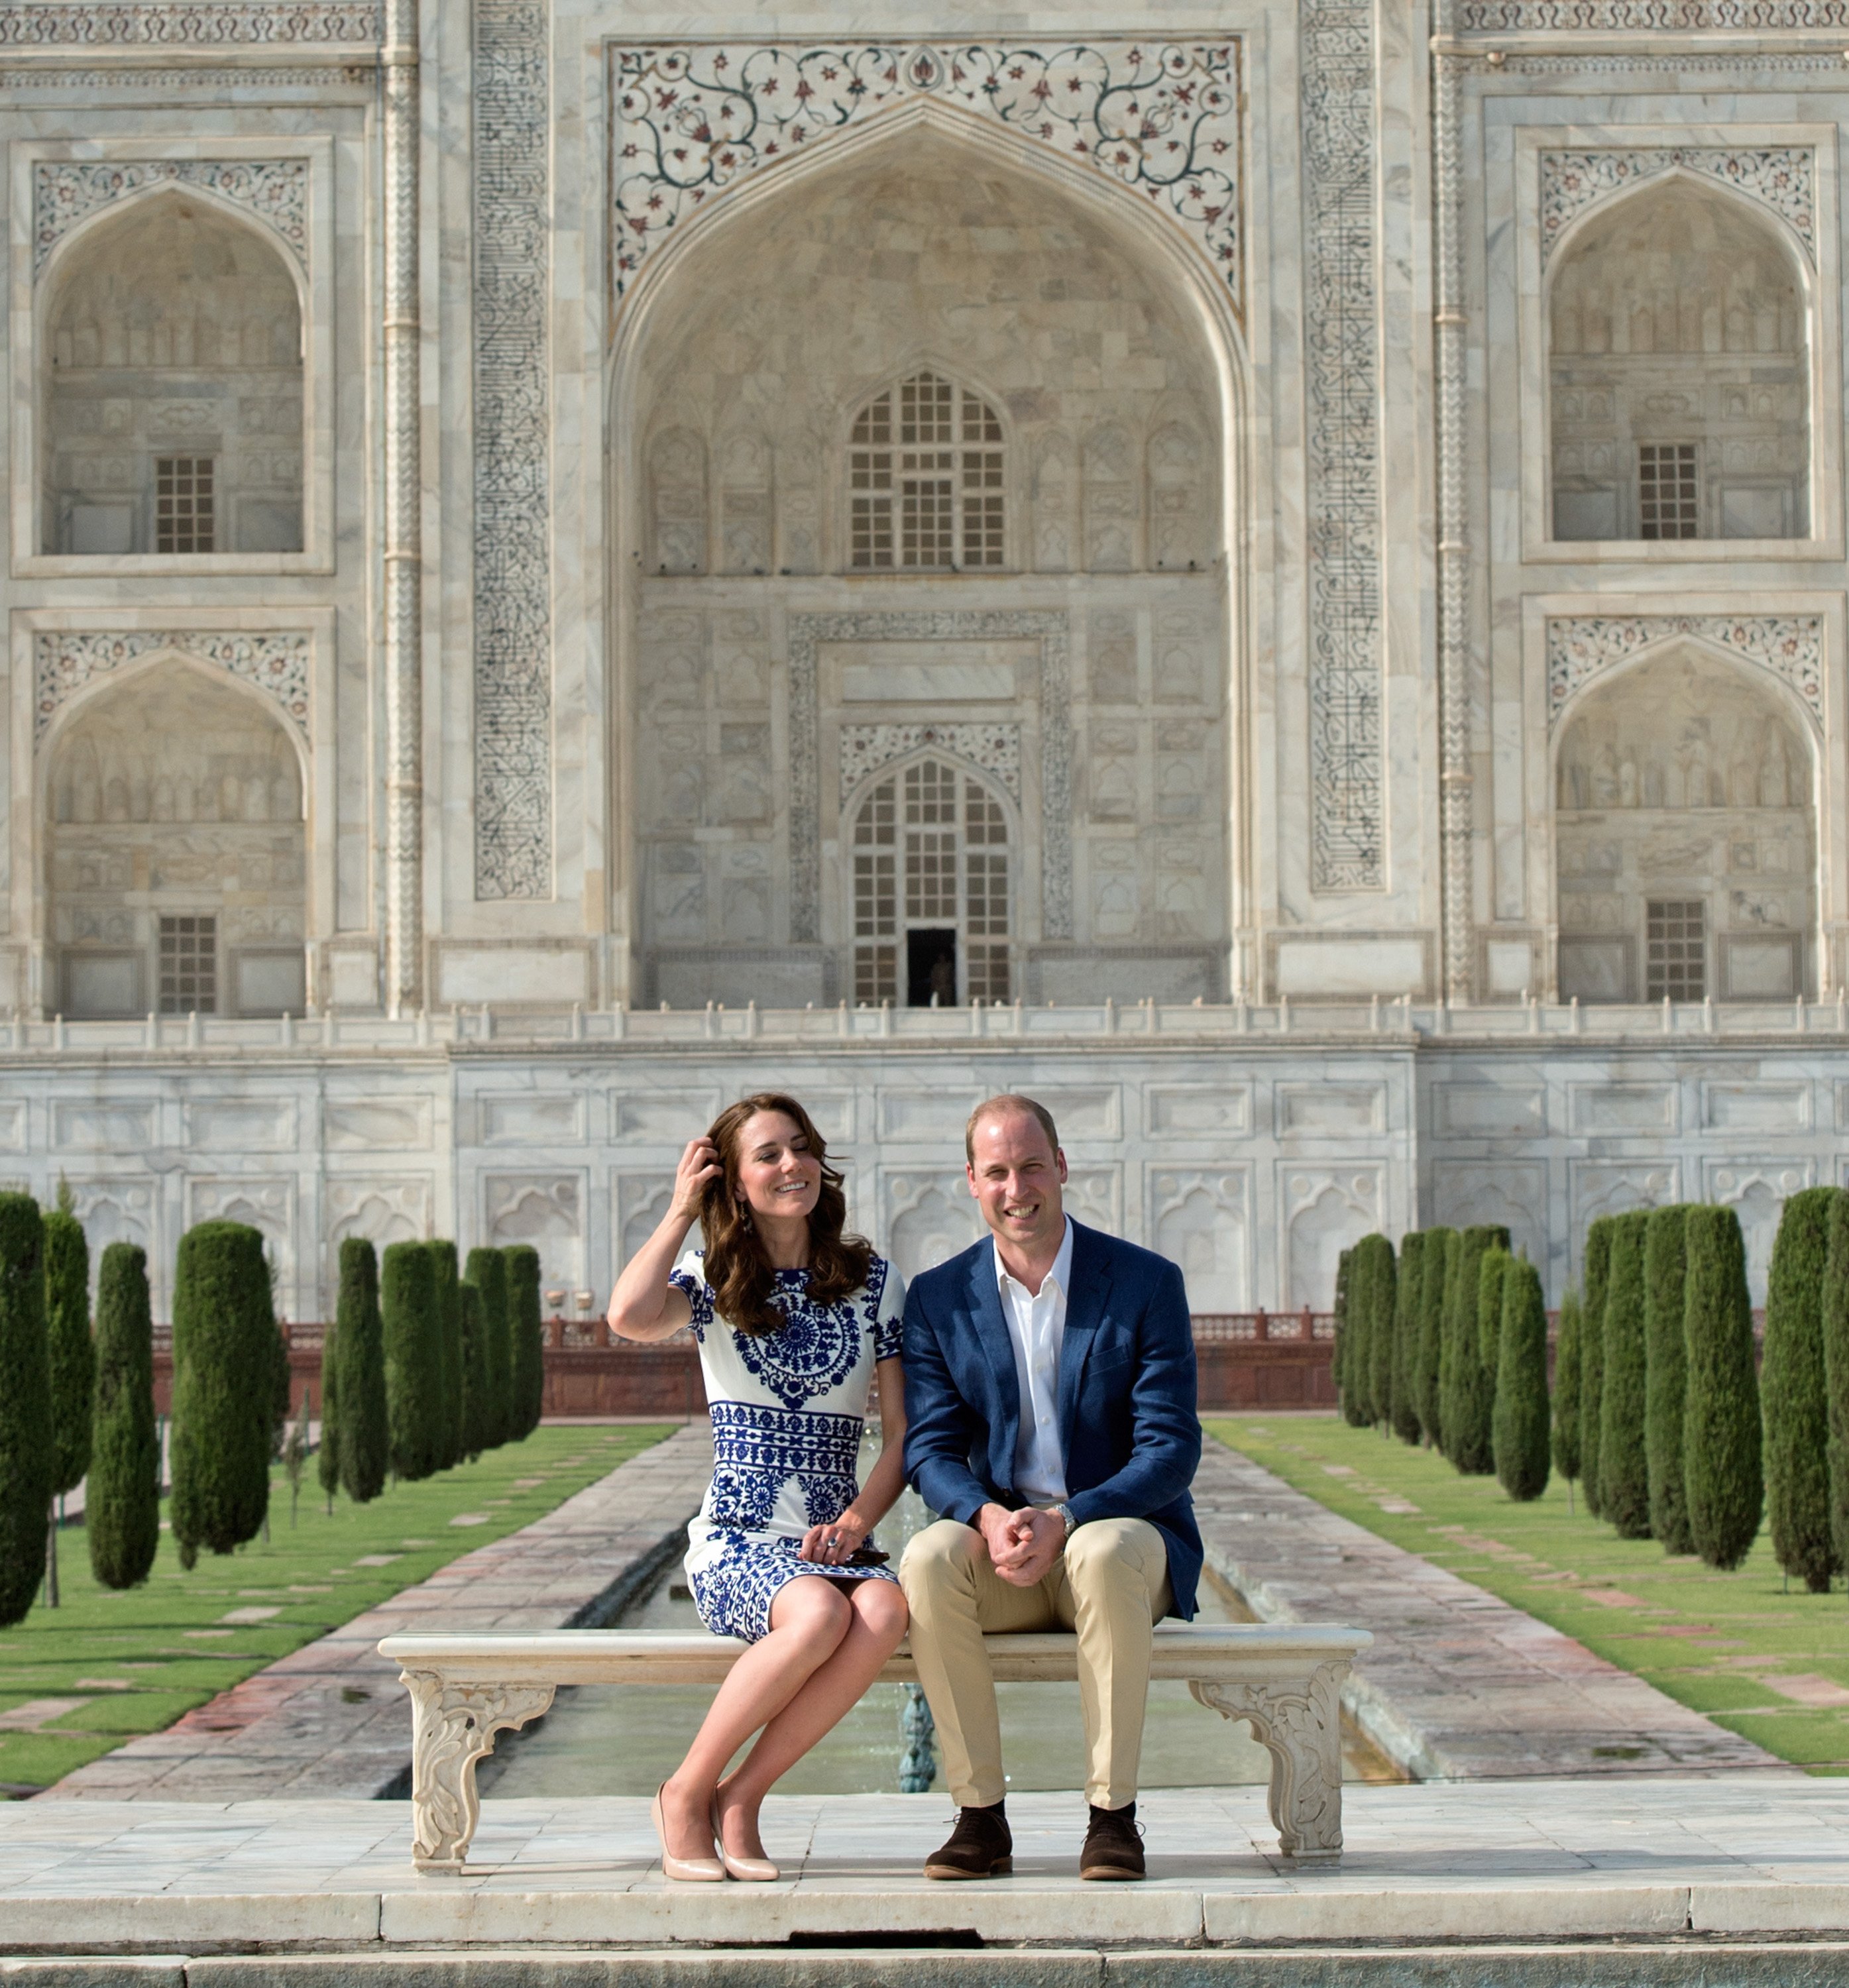 Prince William and Katherine Middleton pose in front of the Taj Mahal on April 16, 2016 | Photo: Getty Images